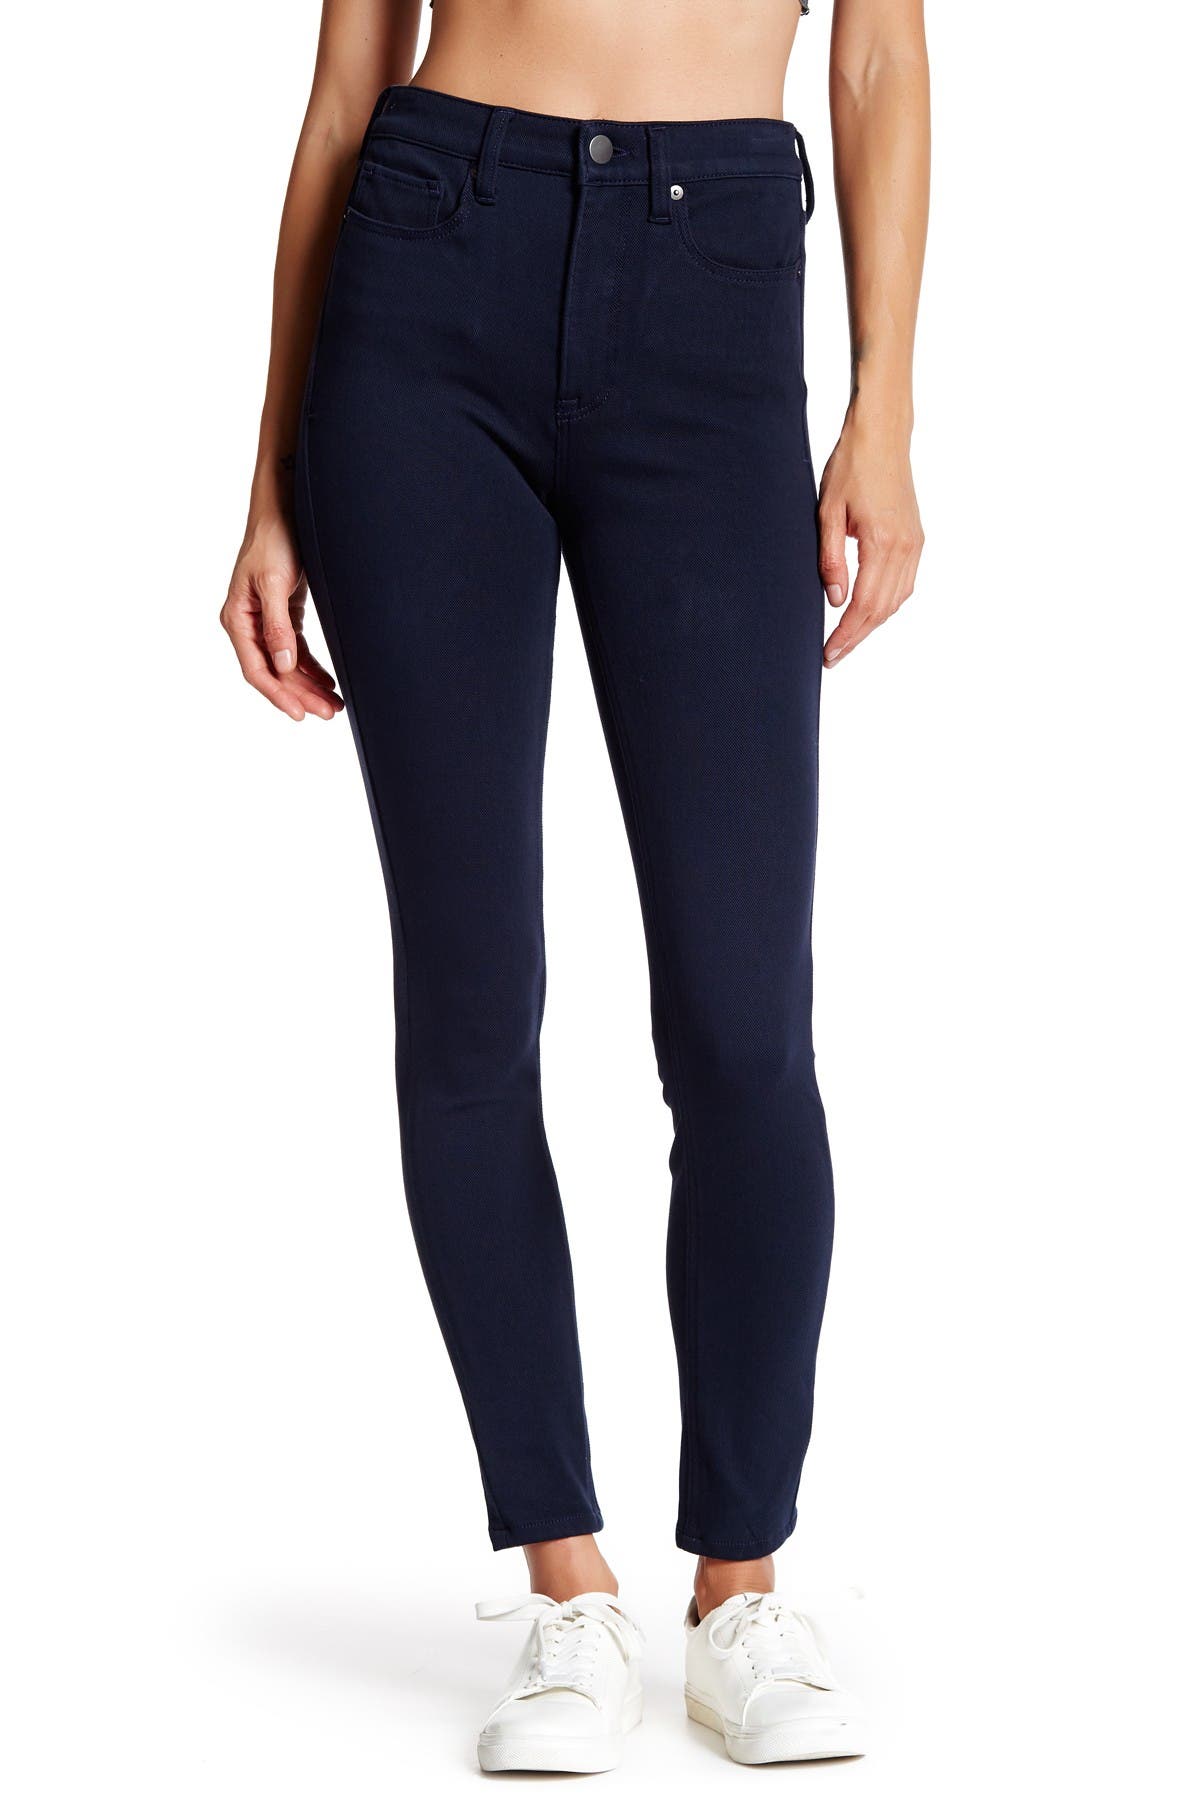 spanx jeans high rise